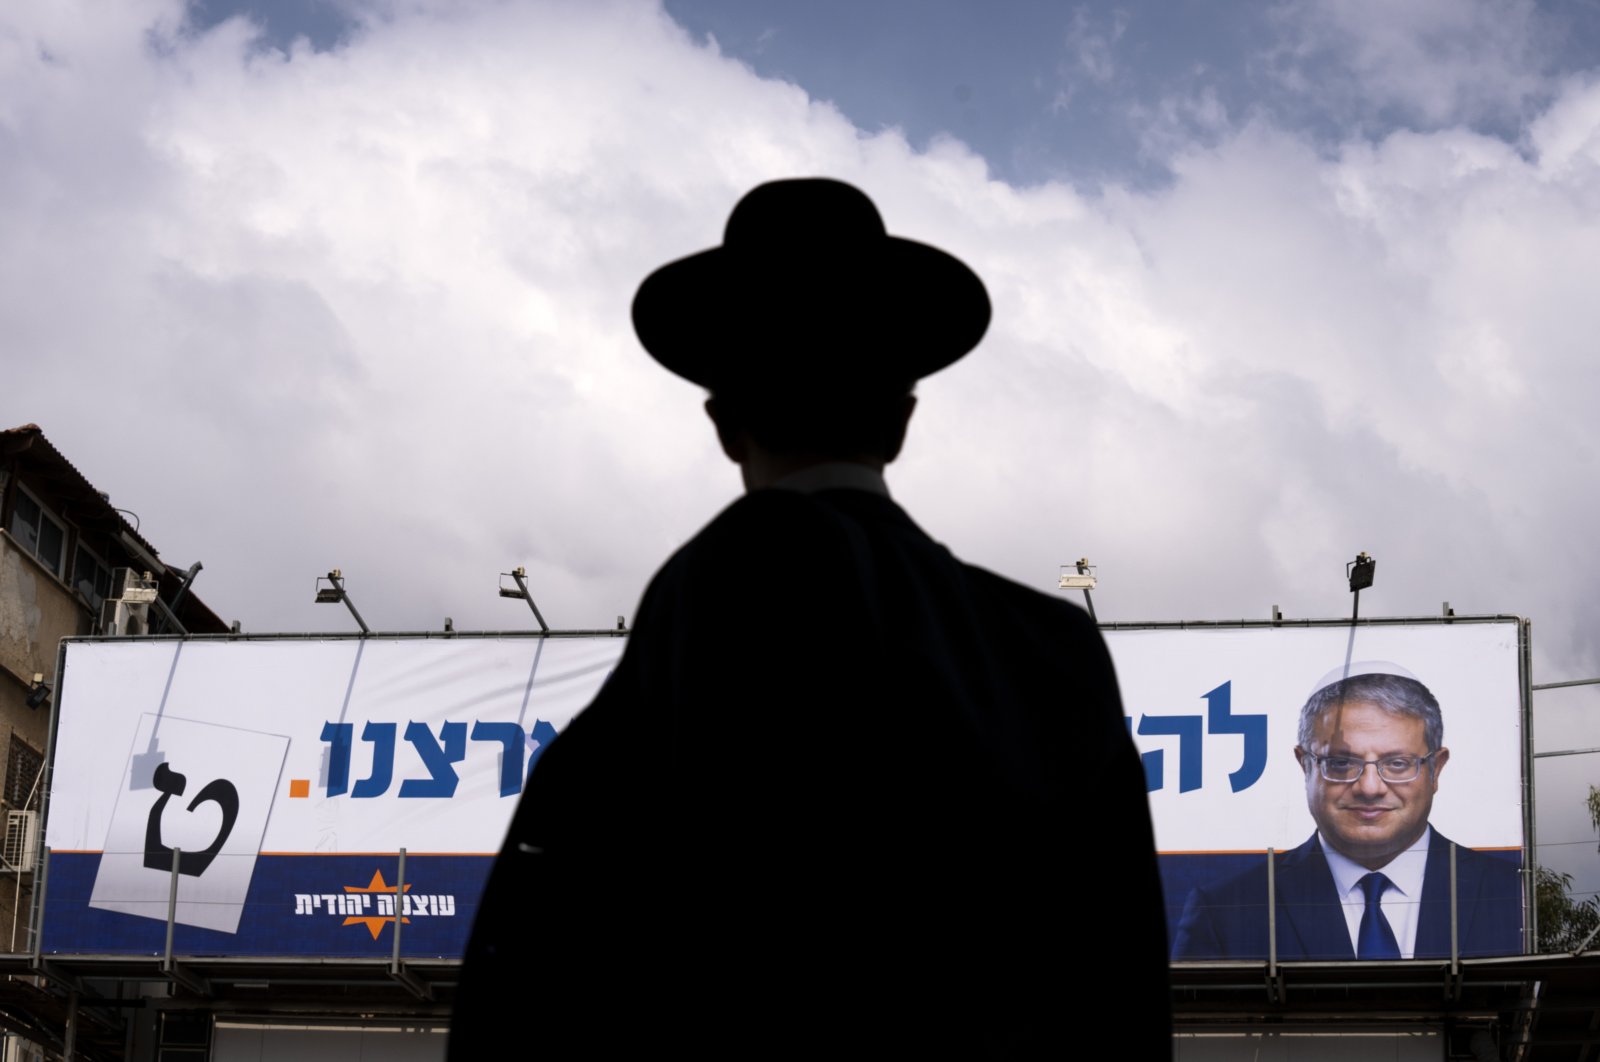 A man walks by an election campaign billboard showing Itamar Ben-Gvir, Israel’s newly elected far-right National Security Minister, Bnei Brak, Israel, Oct. 24, 2022. (AP Photo)